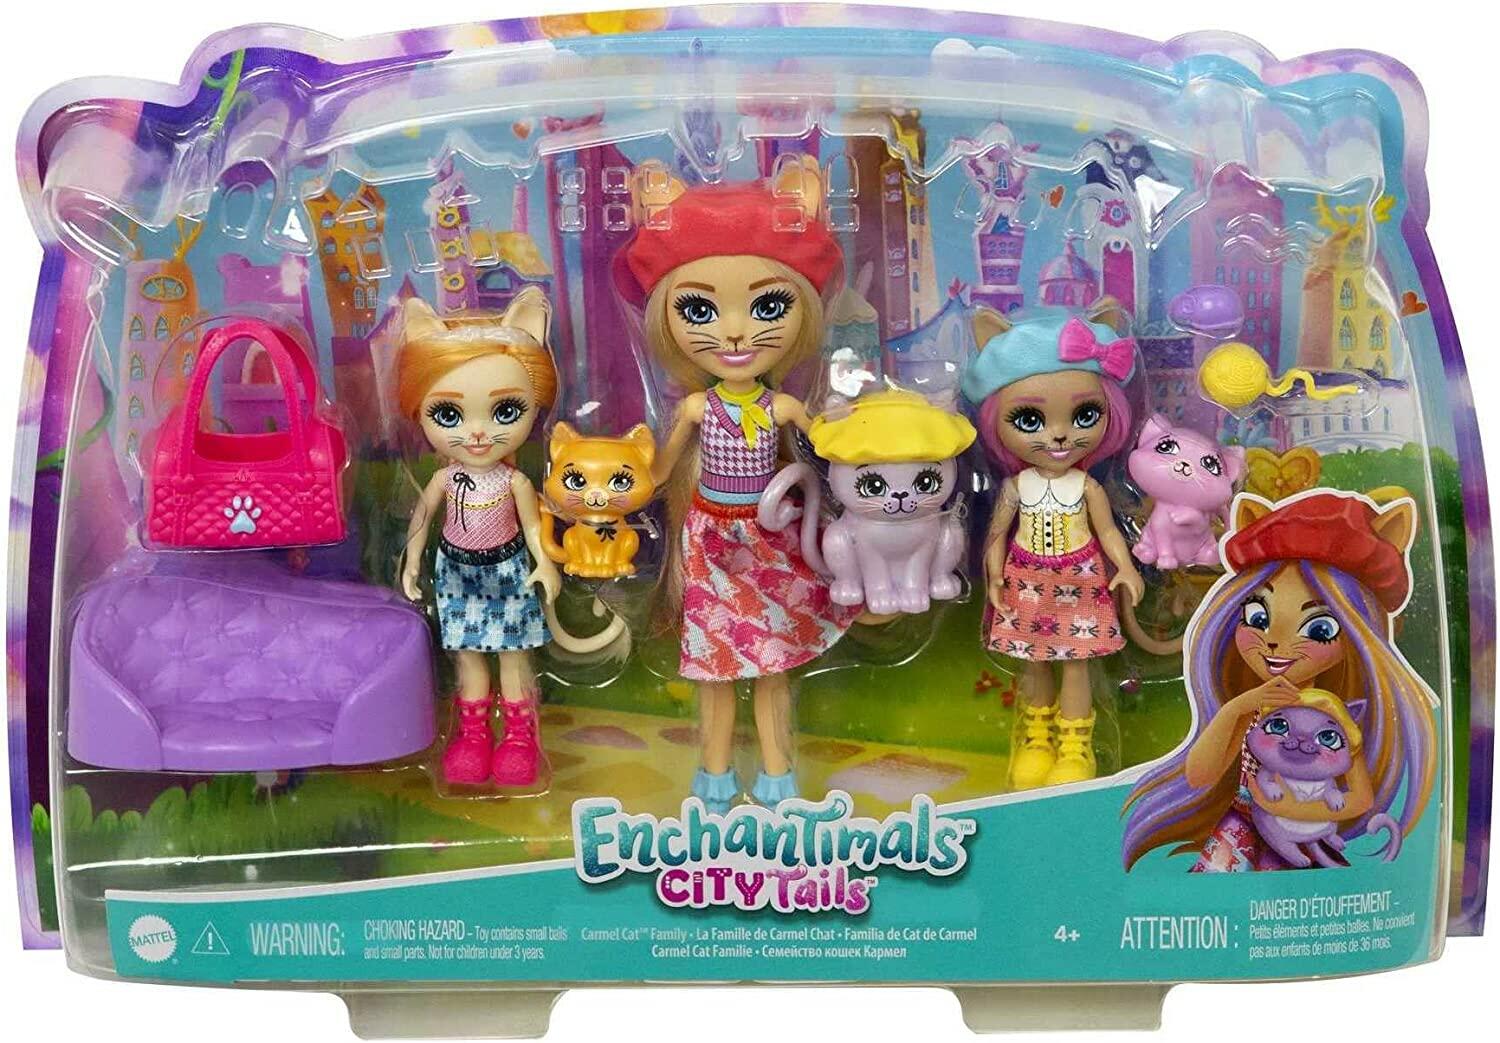 Enchantimals HHC11 City Tails Siam Cat Playset featuring Carmel Cat Girl Doll for endless imaginative fun in the city.